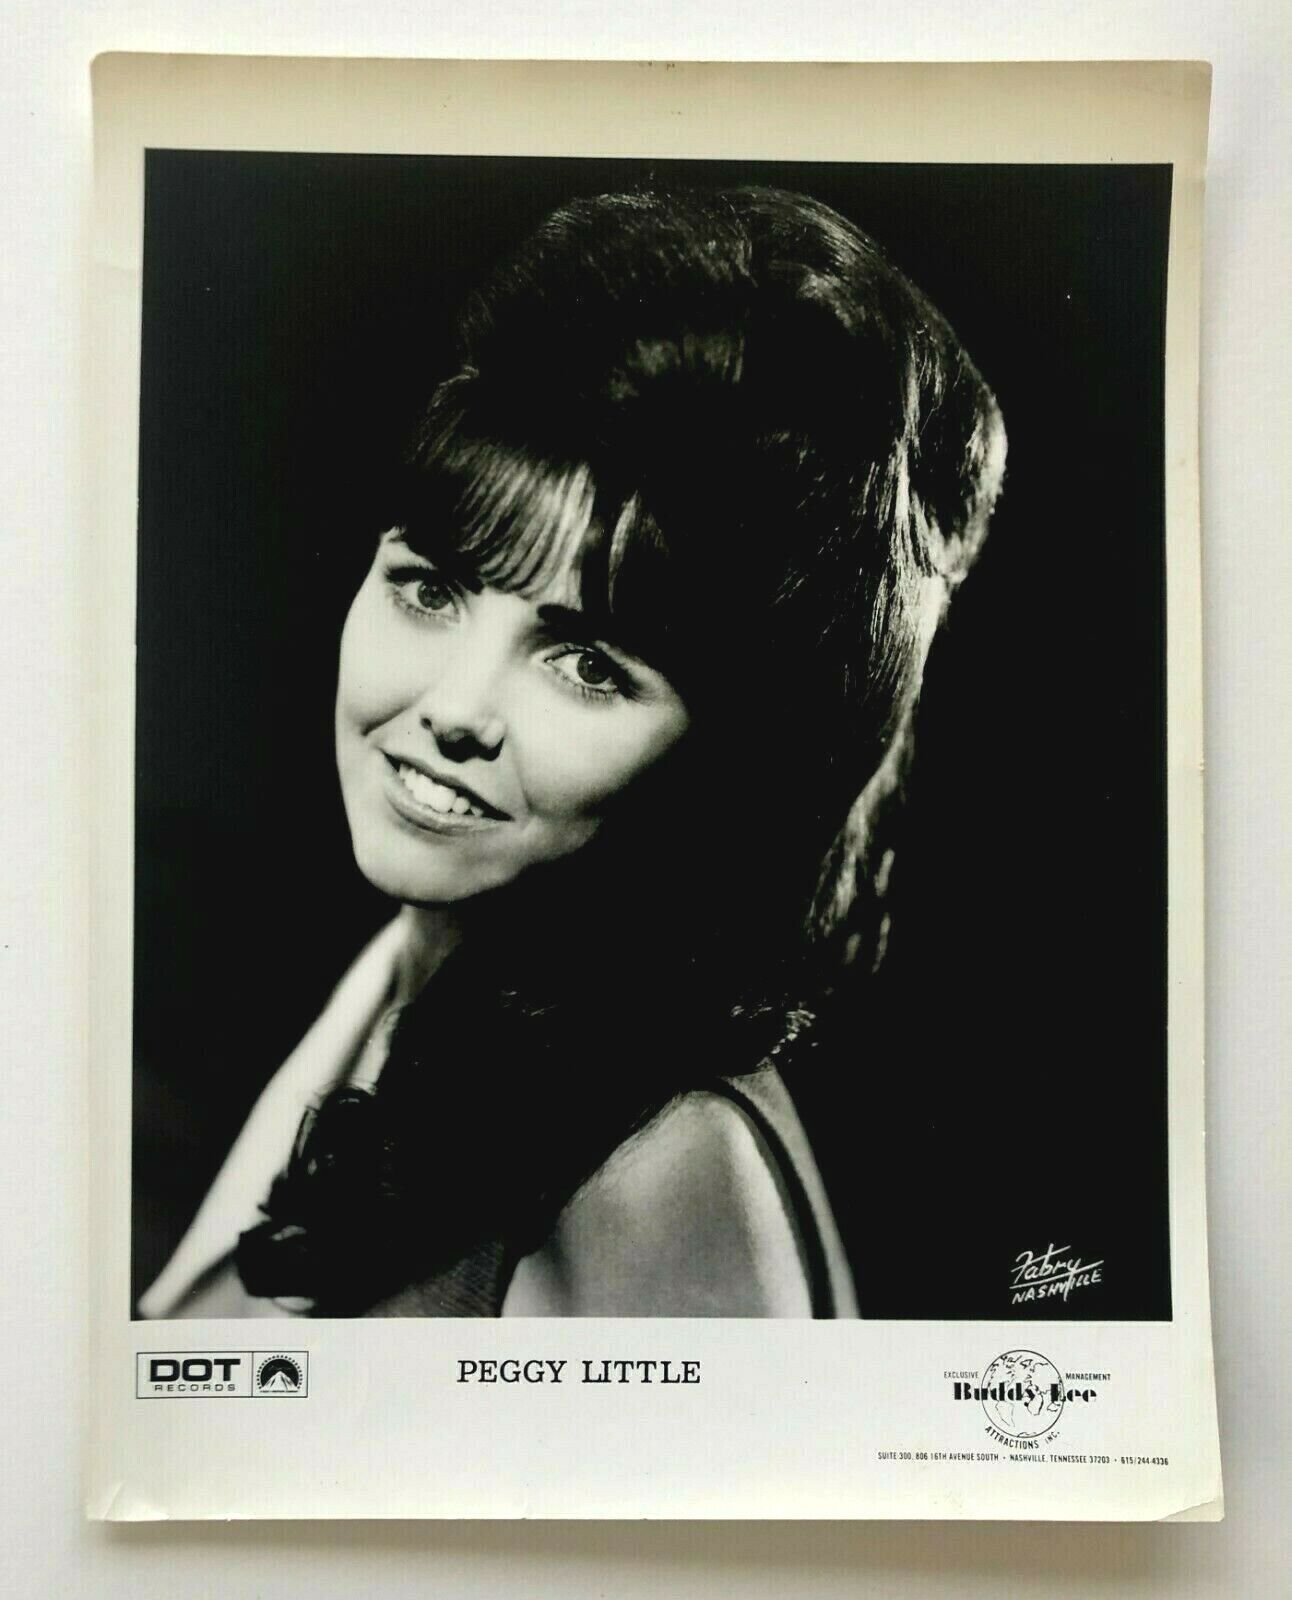 1970s Peggy Little Press Promo Photo Country Cover Singer Son Of A Preacher Man